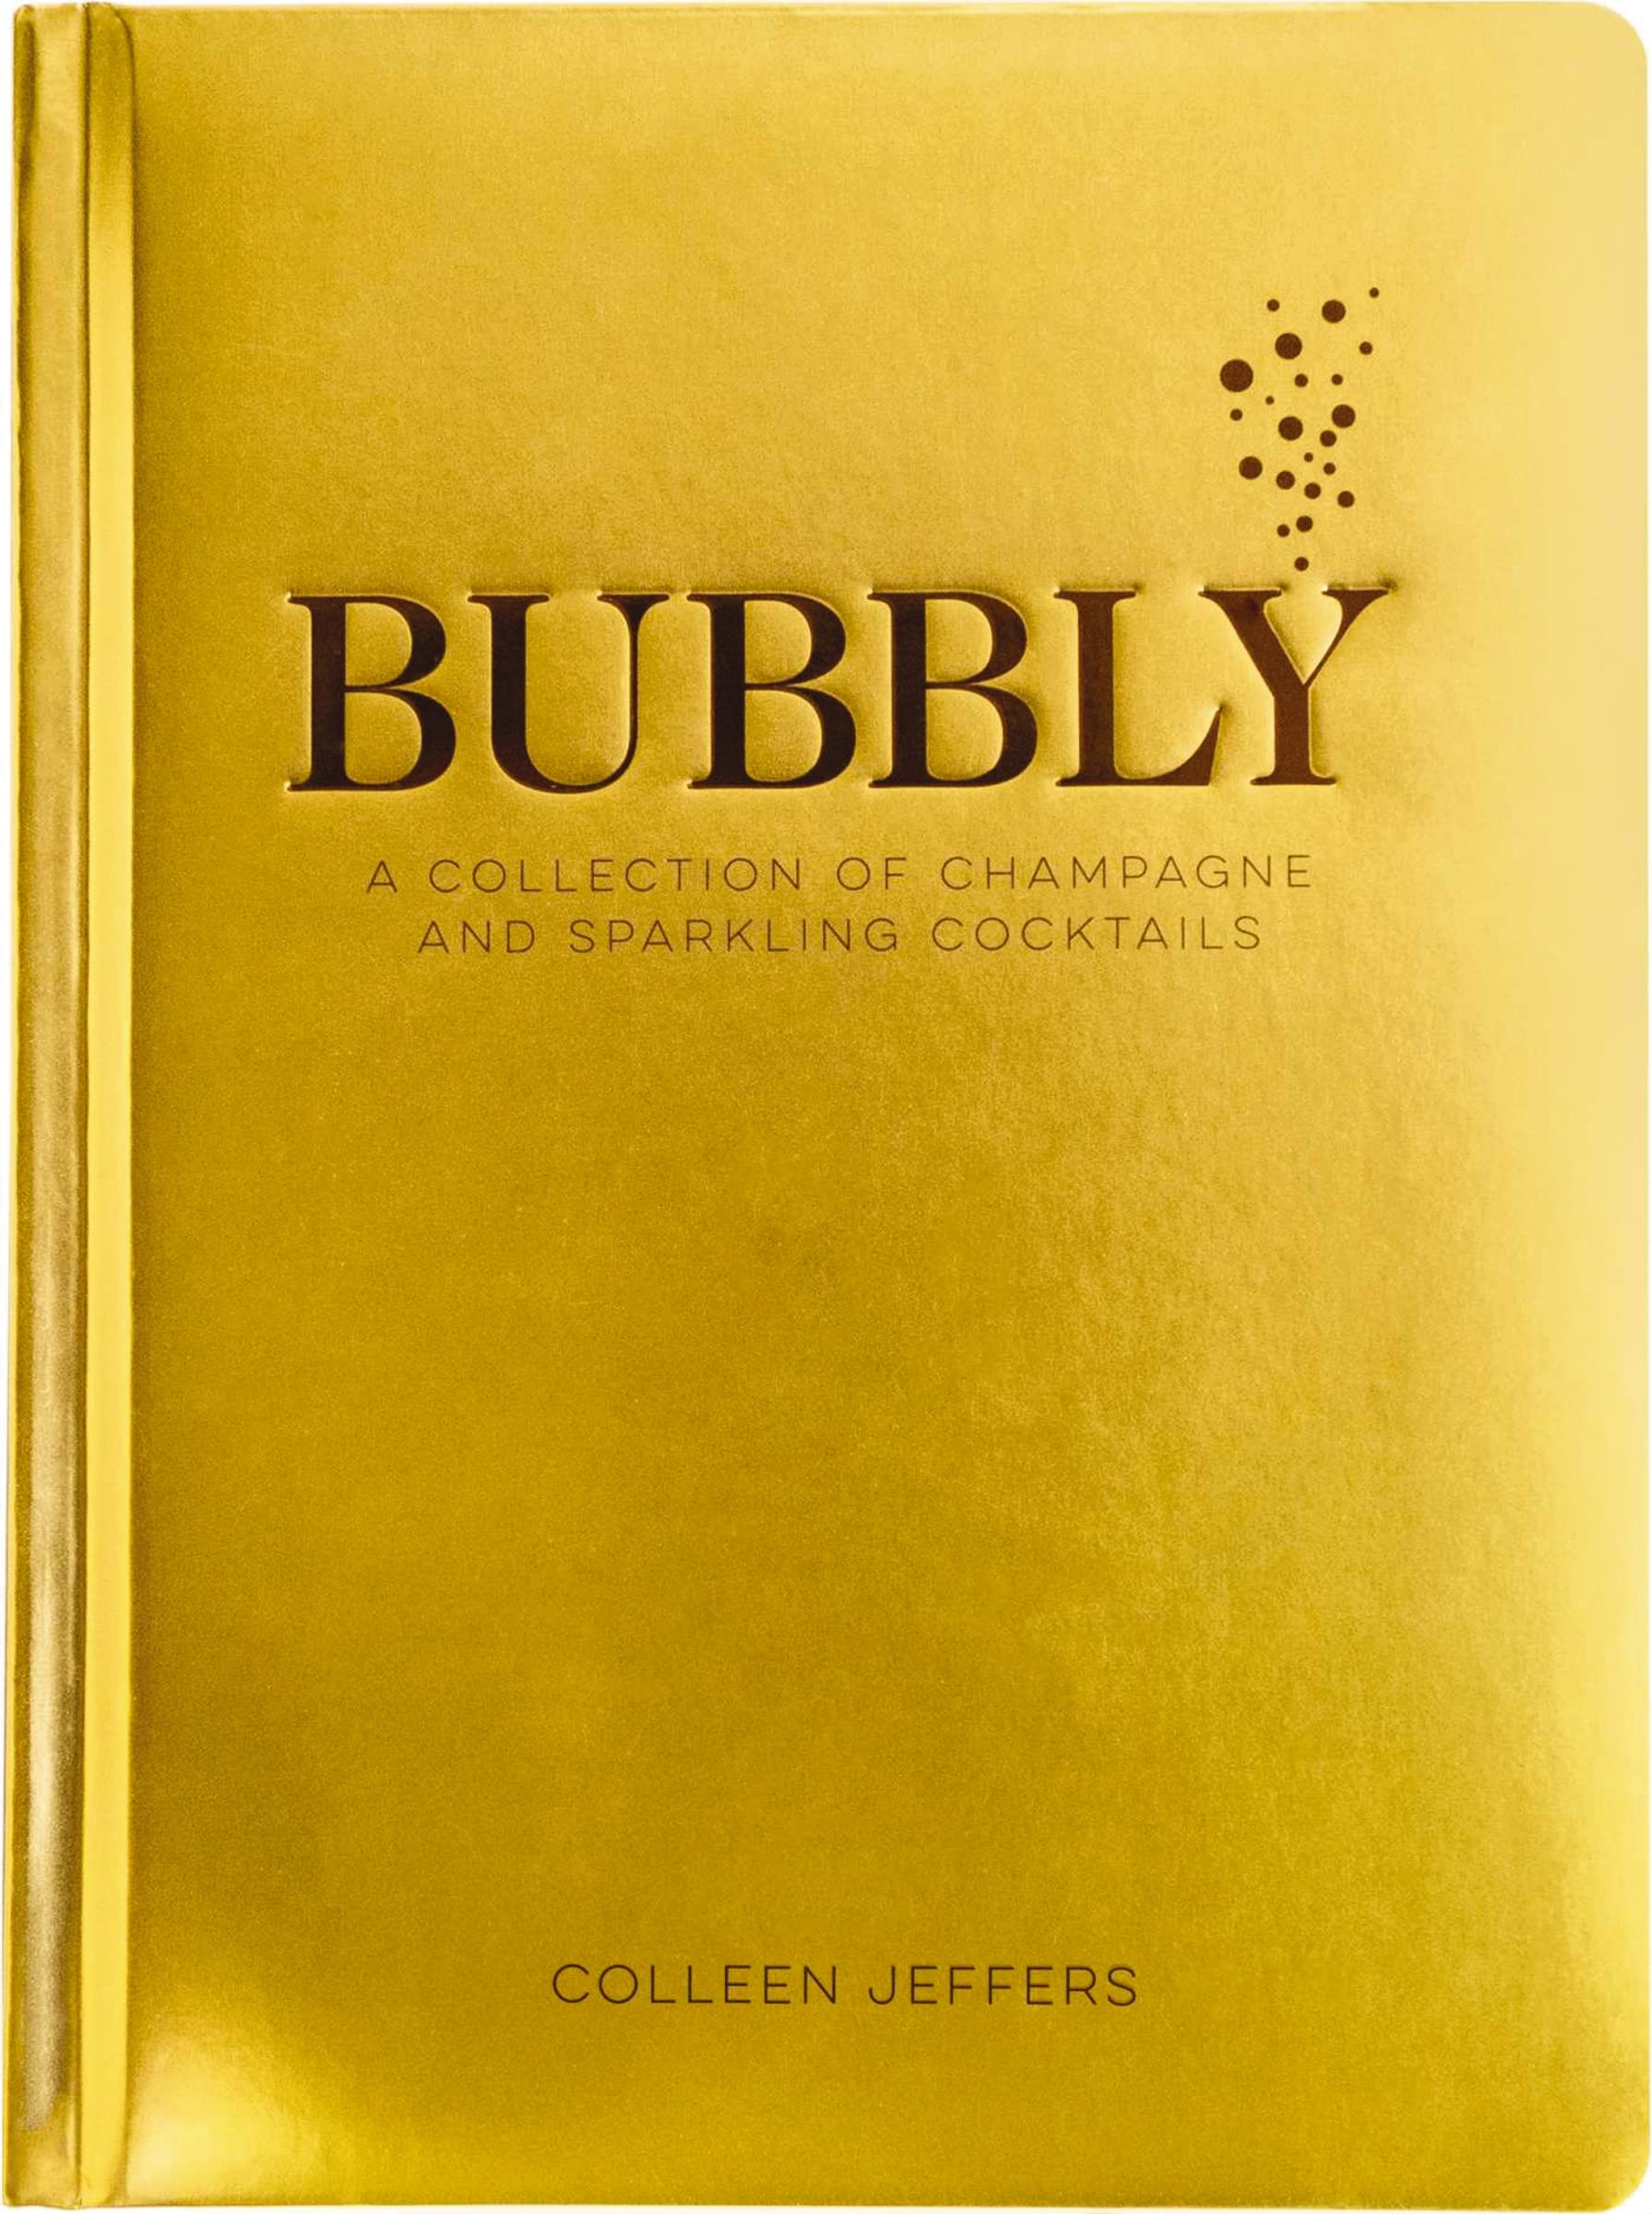 Bubbly: A Collection of Champagne and Sparkling Cocktails by Jeffers, Colleen